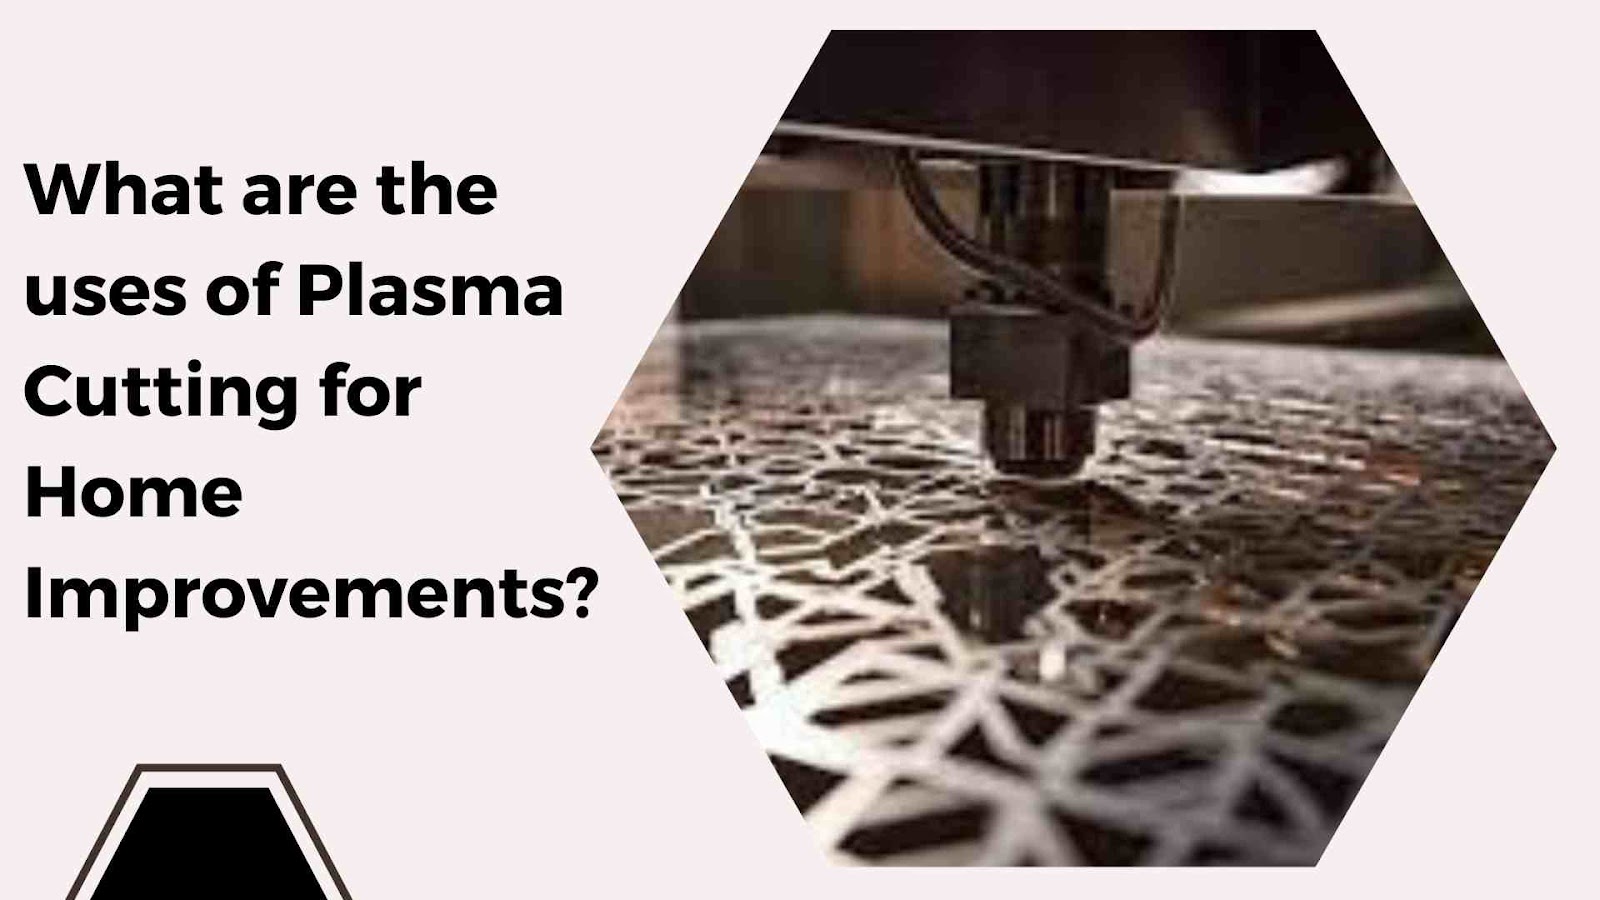 What are the uses of Plasma Cutting for Home Improvements?